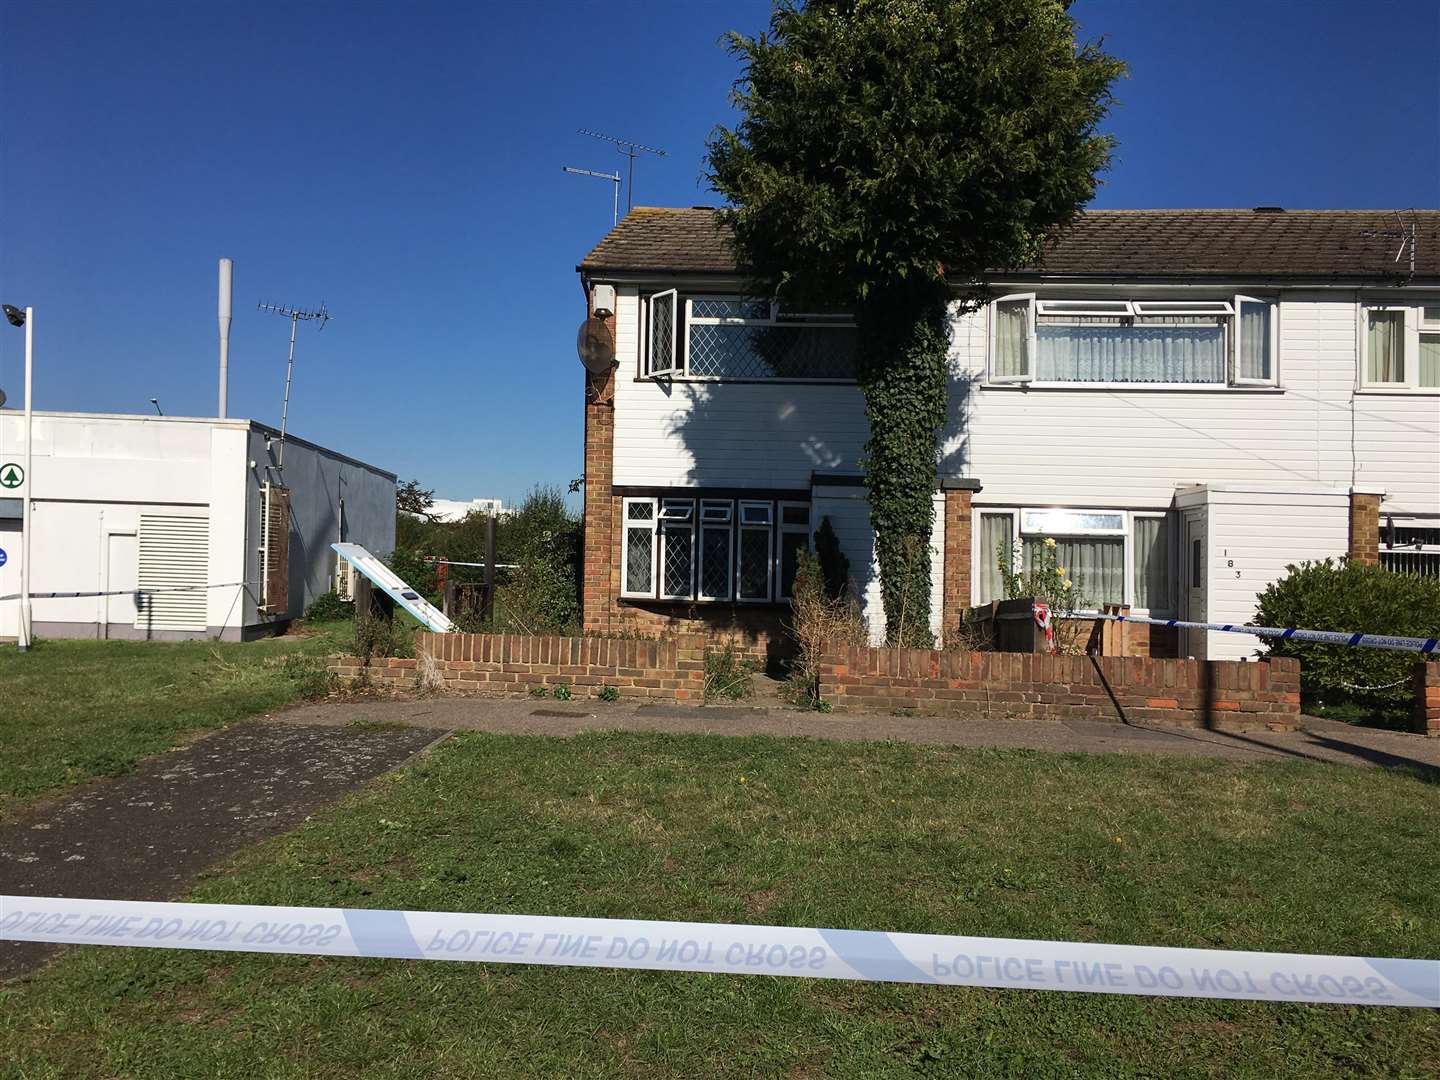 The house has been cordoned-off and police are still at the scene. (4456494)